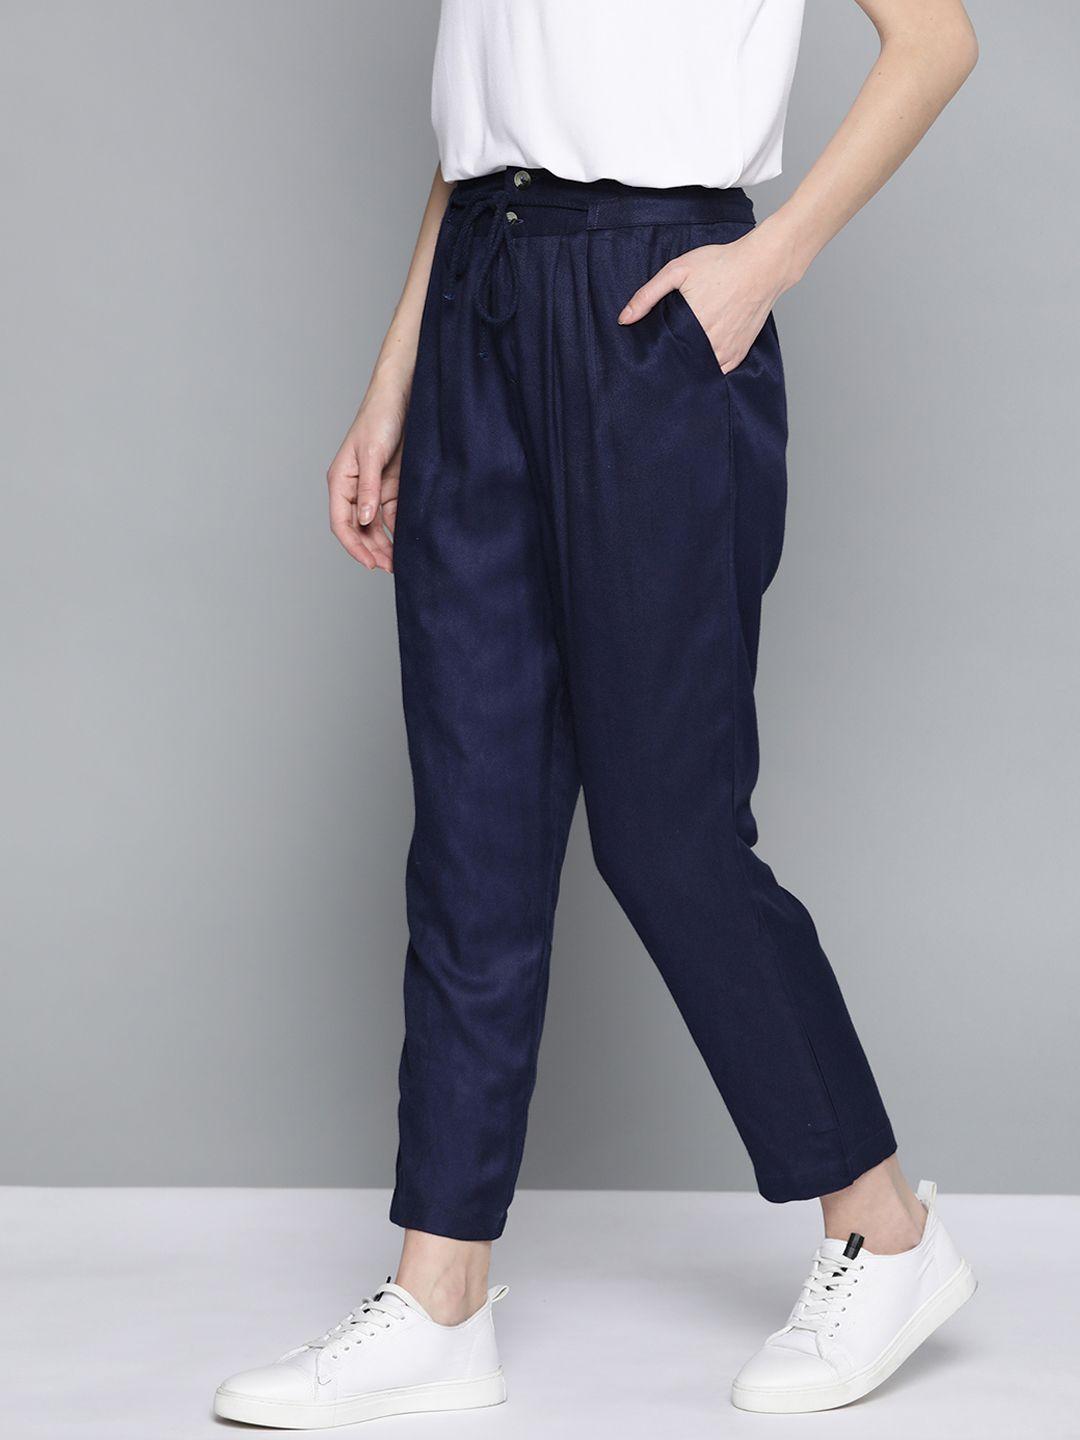 mast & harbour women navy blue pleated trousers